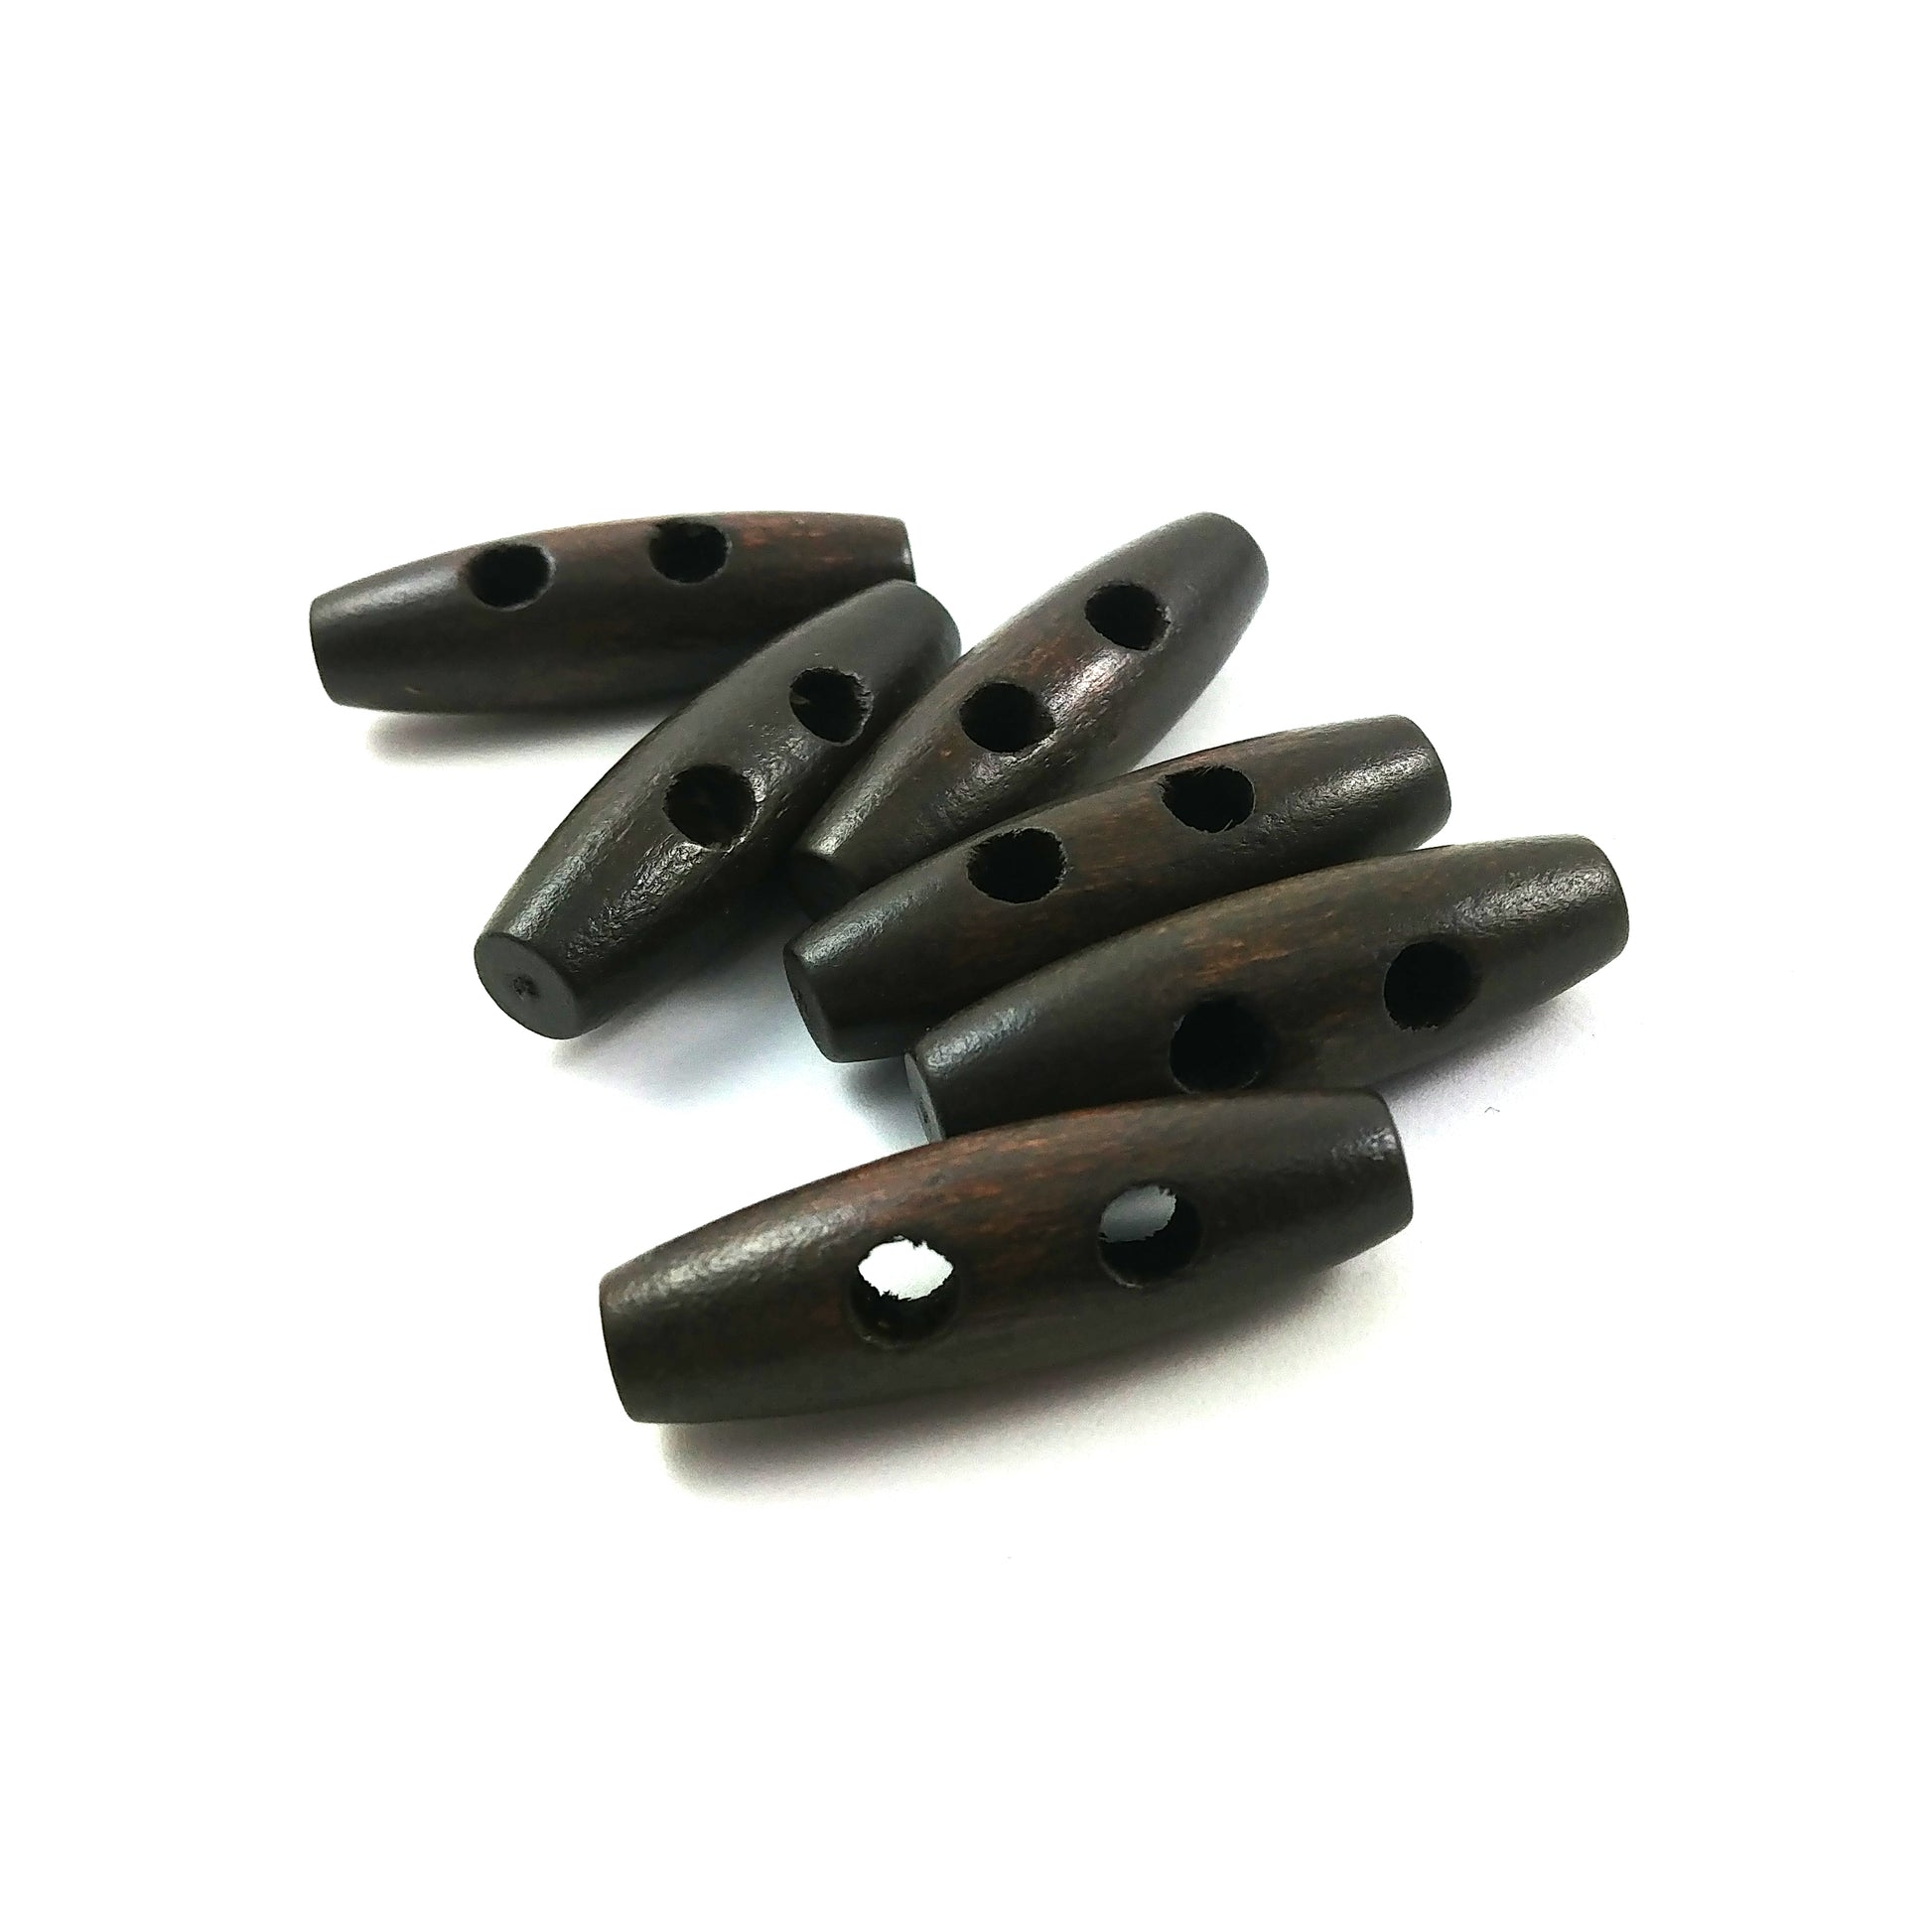 6 wooden Toggle Buttons - Dark Brown 3.5 x 1.1cm